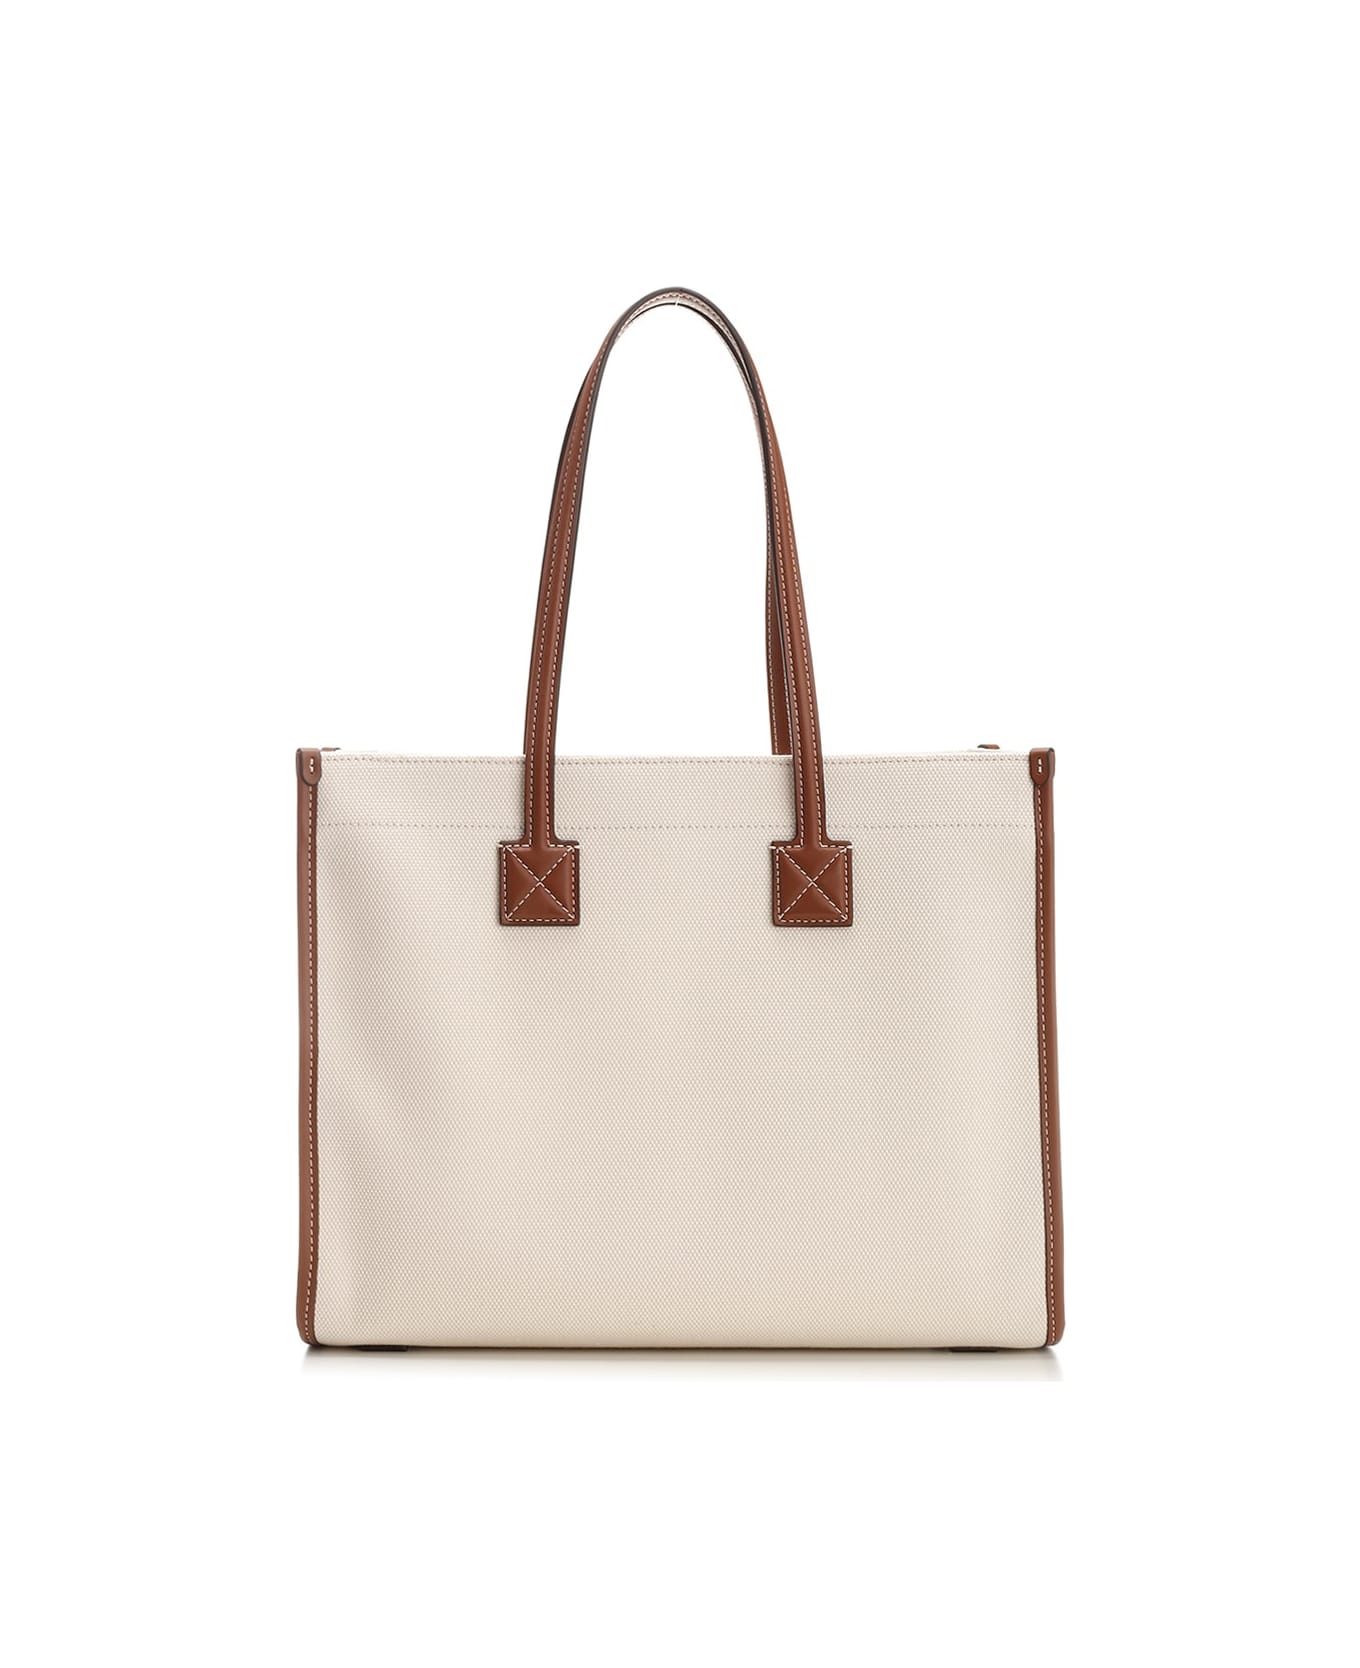 Burberry Tote Bag In Canvas - White トートバッグ